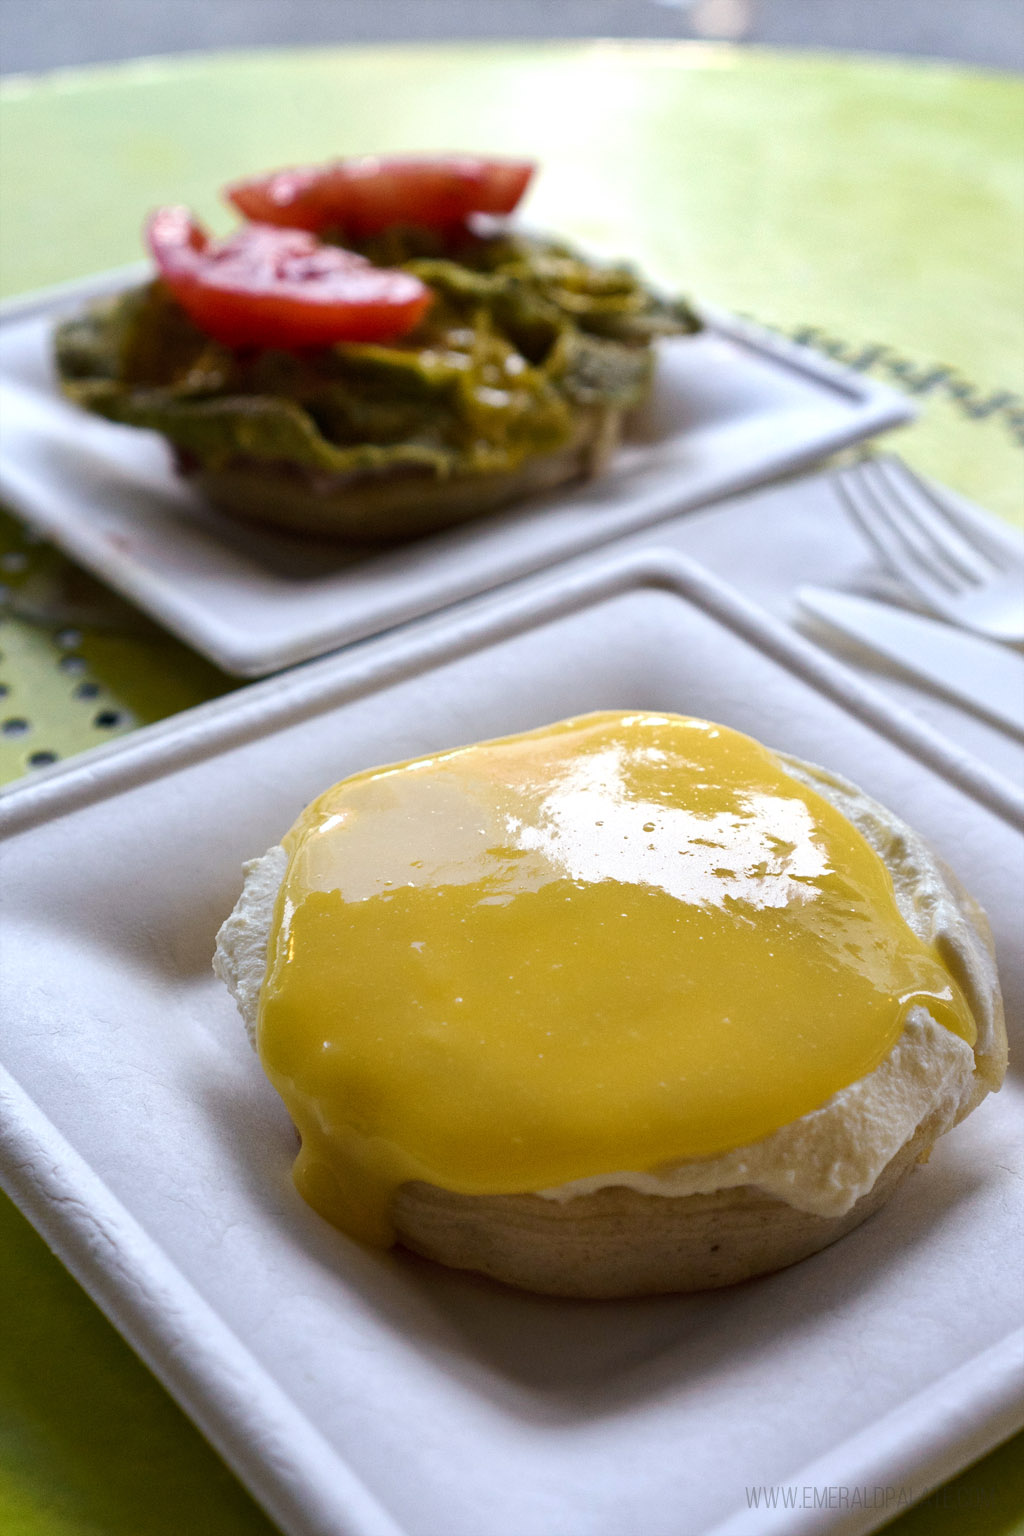 crumpet topped with lemon curd and ricotta, some of the best breakfast in Pike Place Market